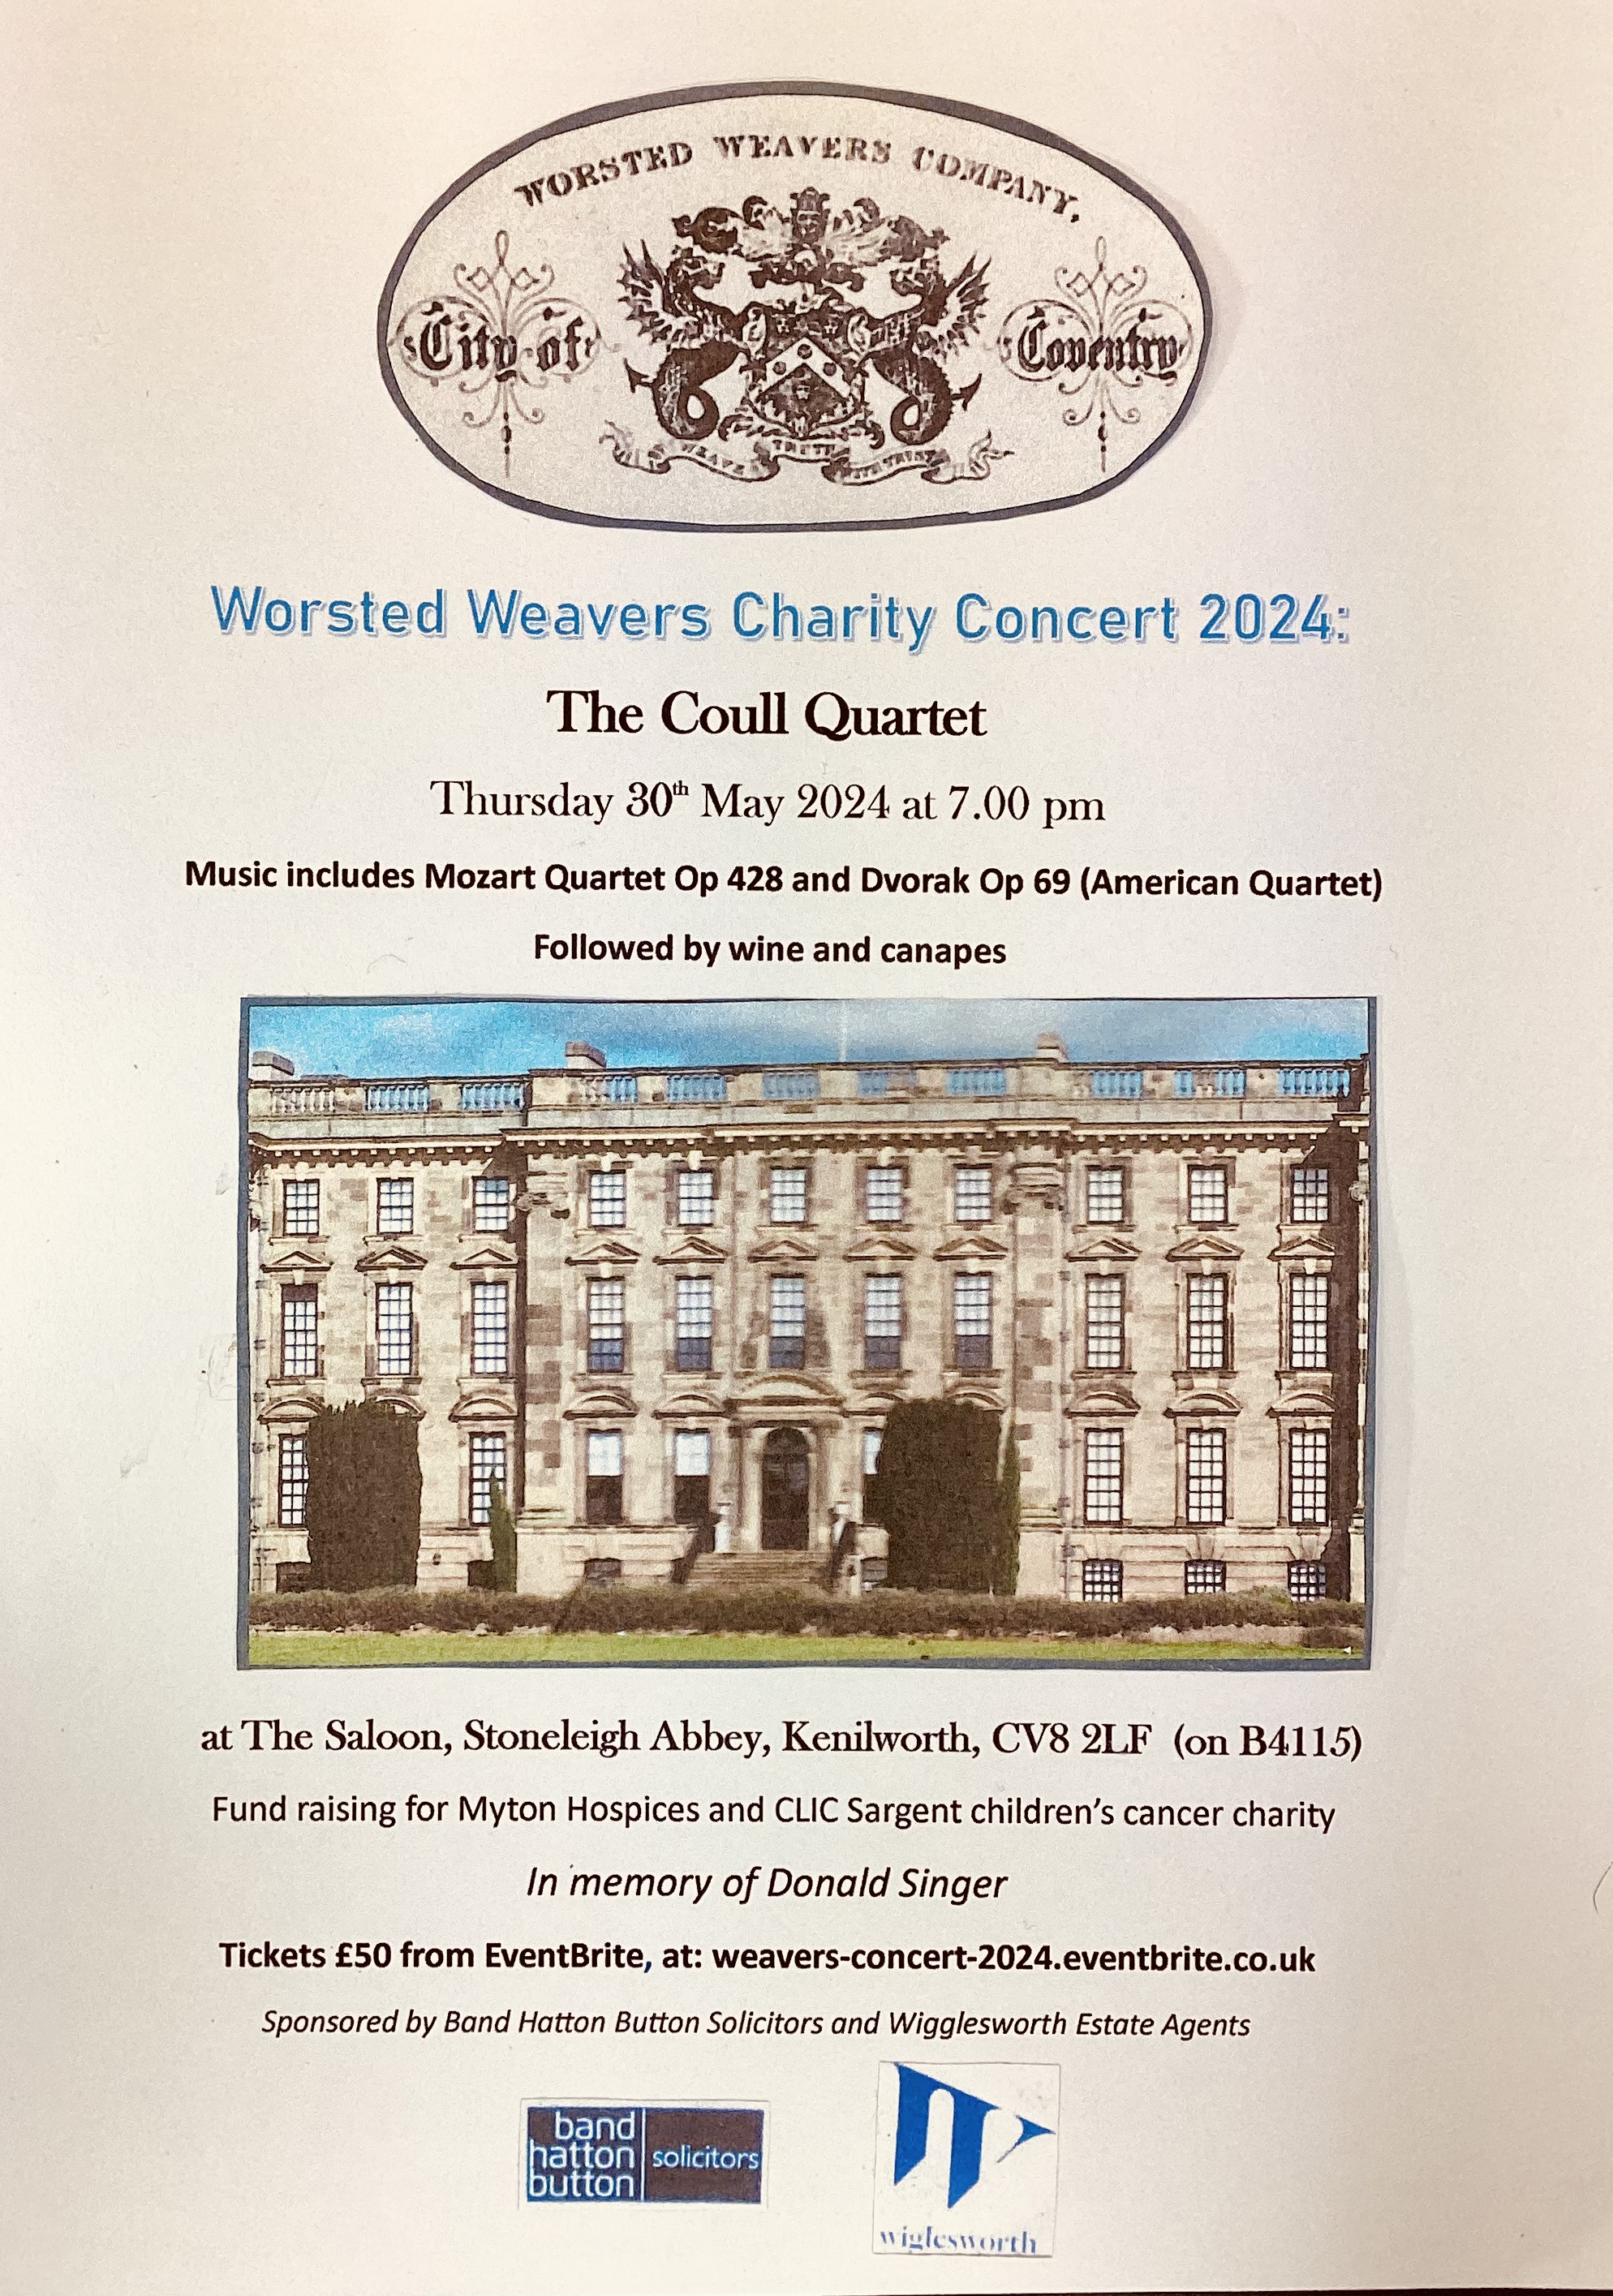 Worsted Weavers Charity Concert 2024 